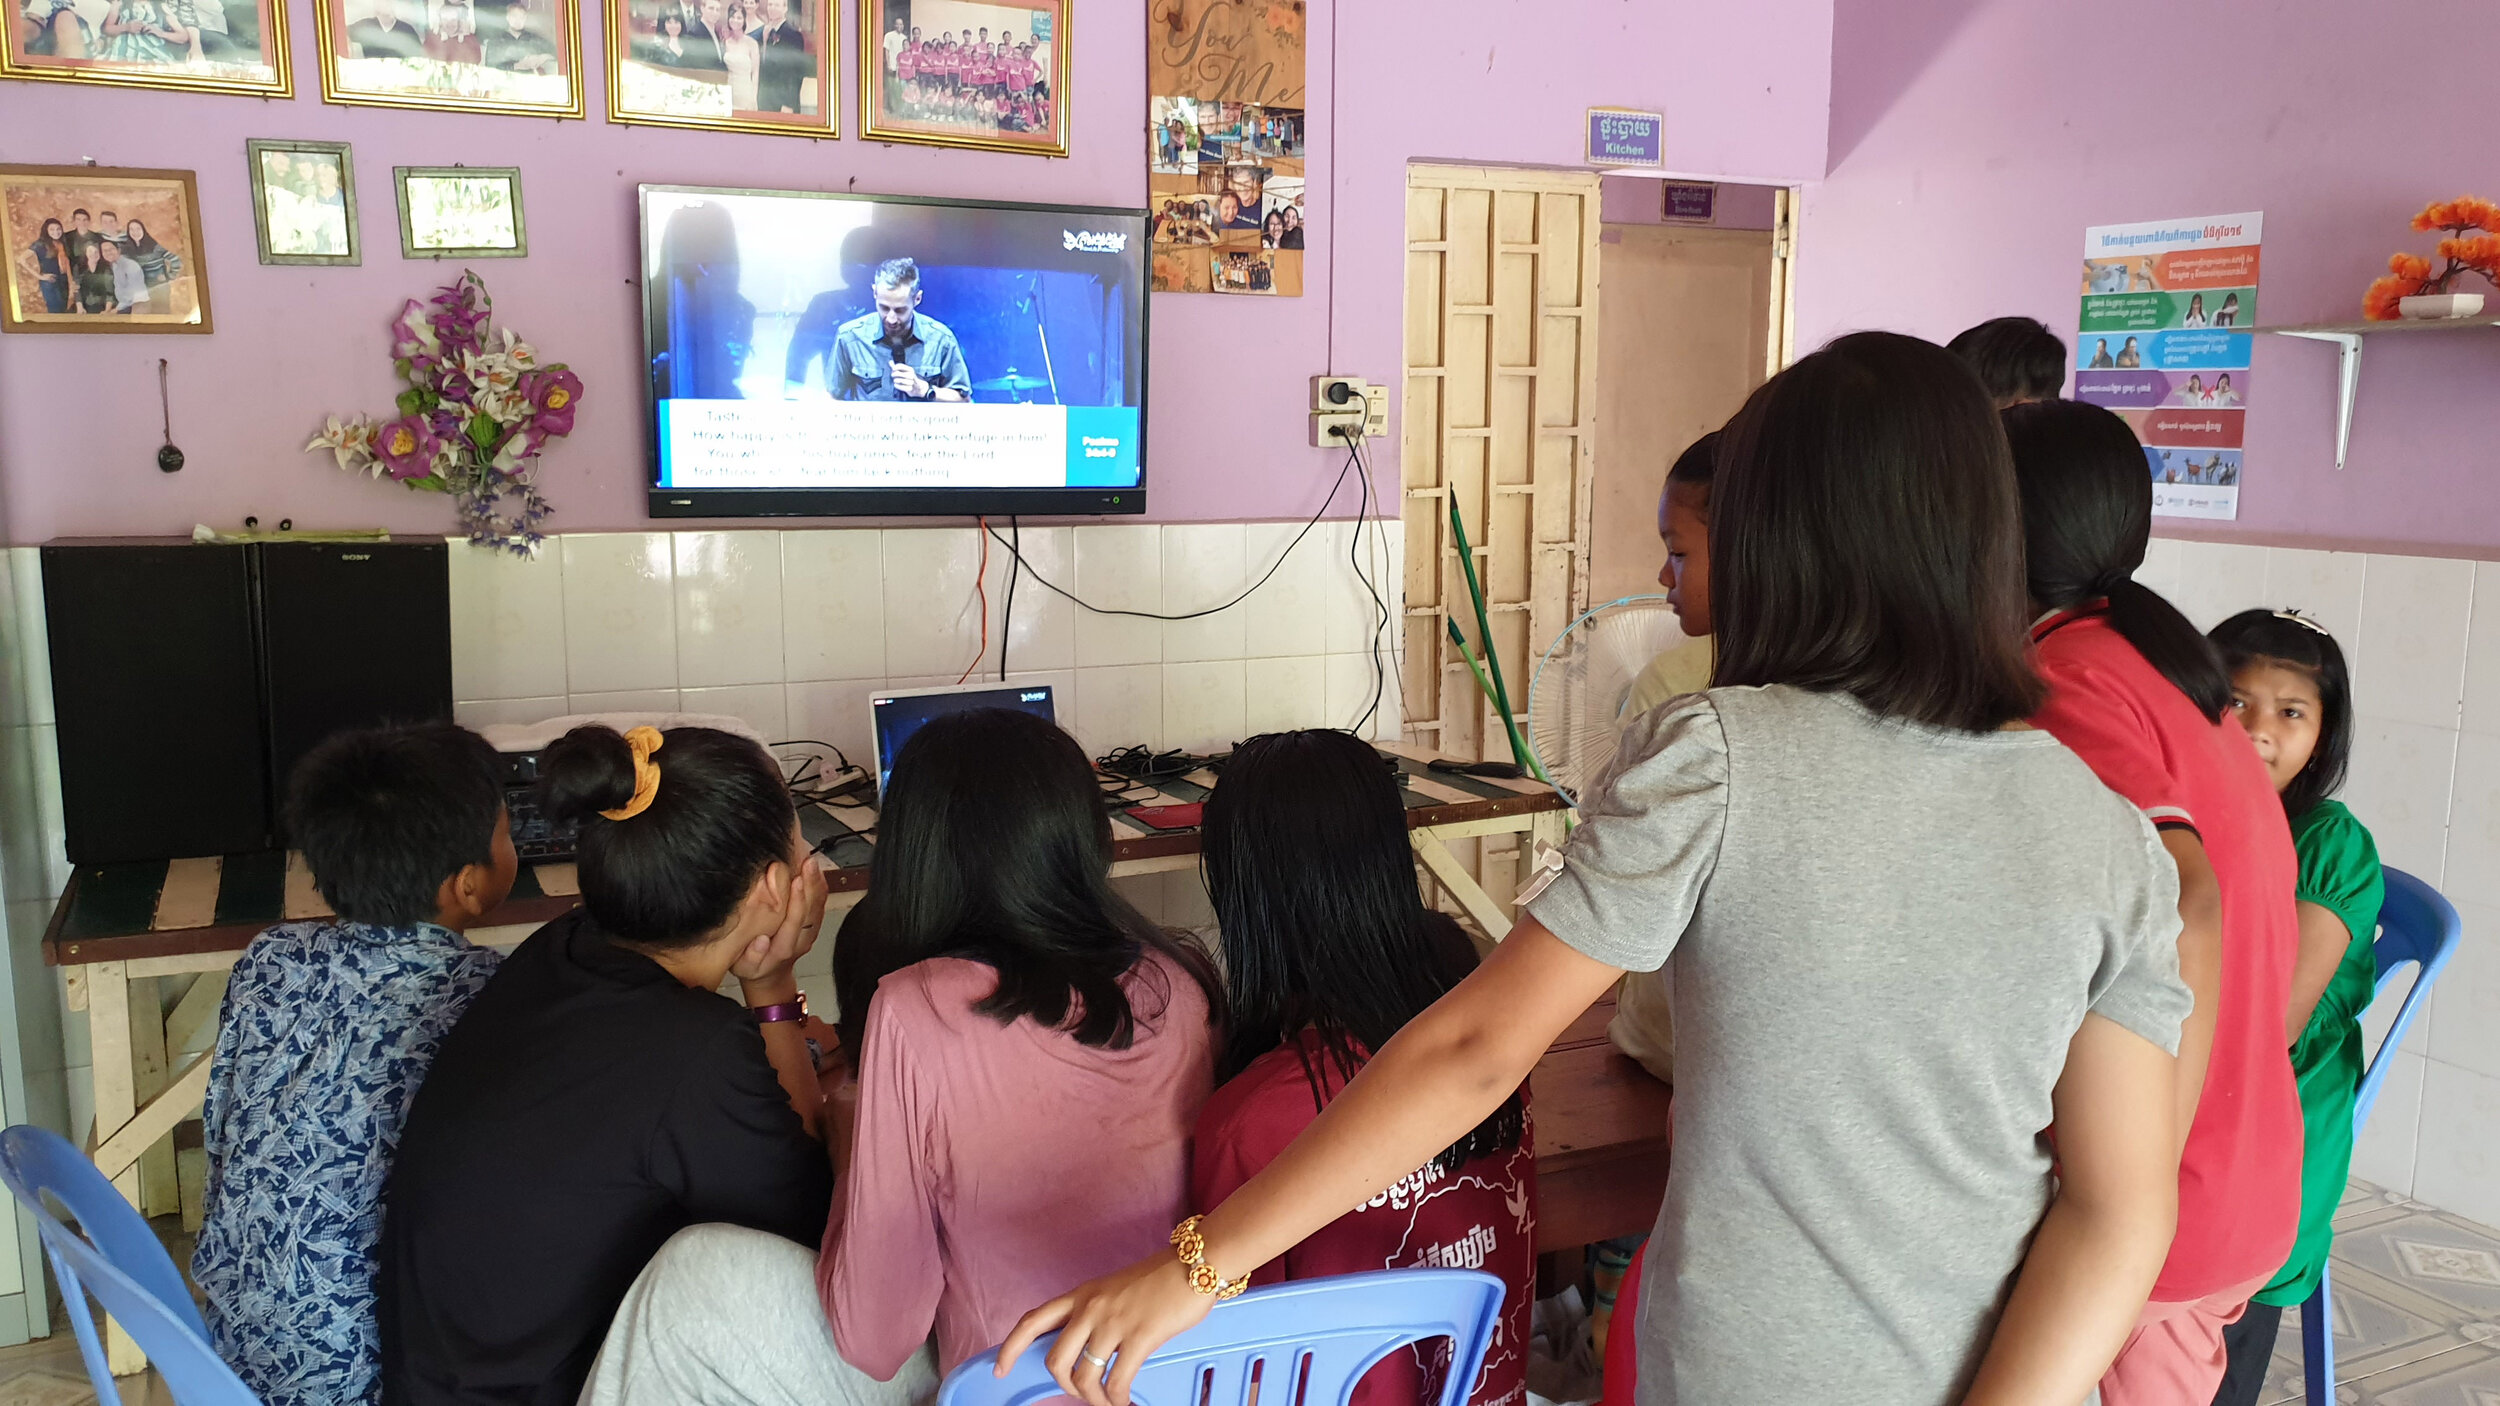  Like many of their supporters across the globe, these kids in Cambodia are watching church services from their living room. 